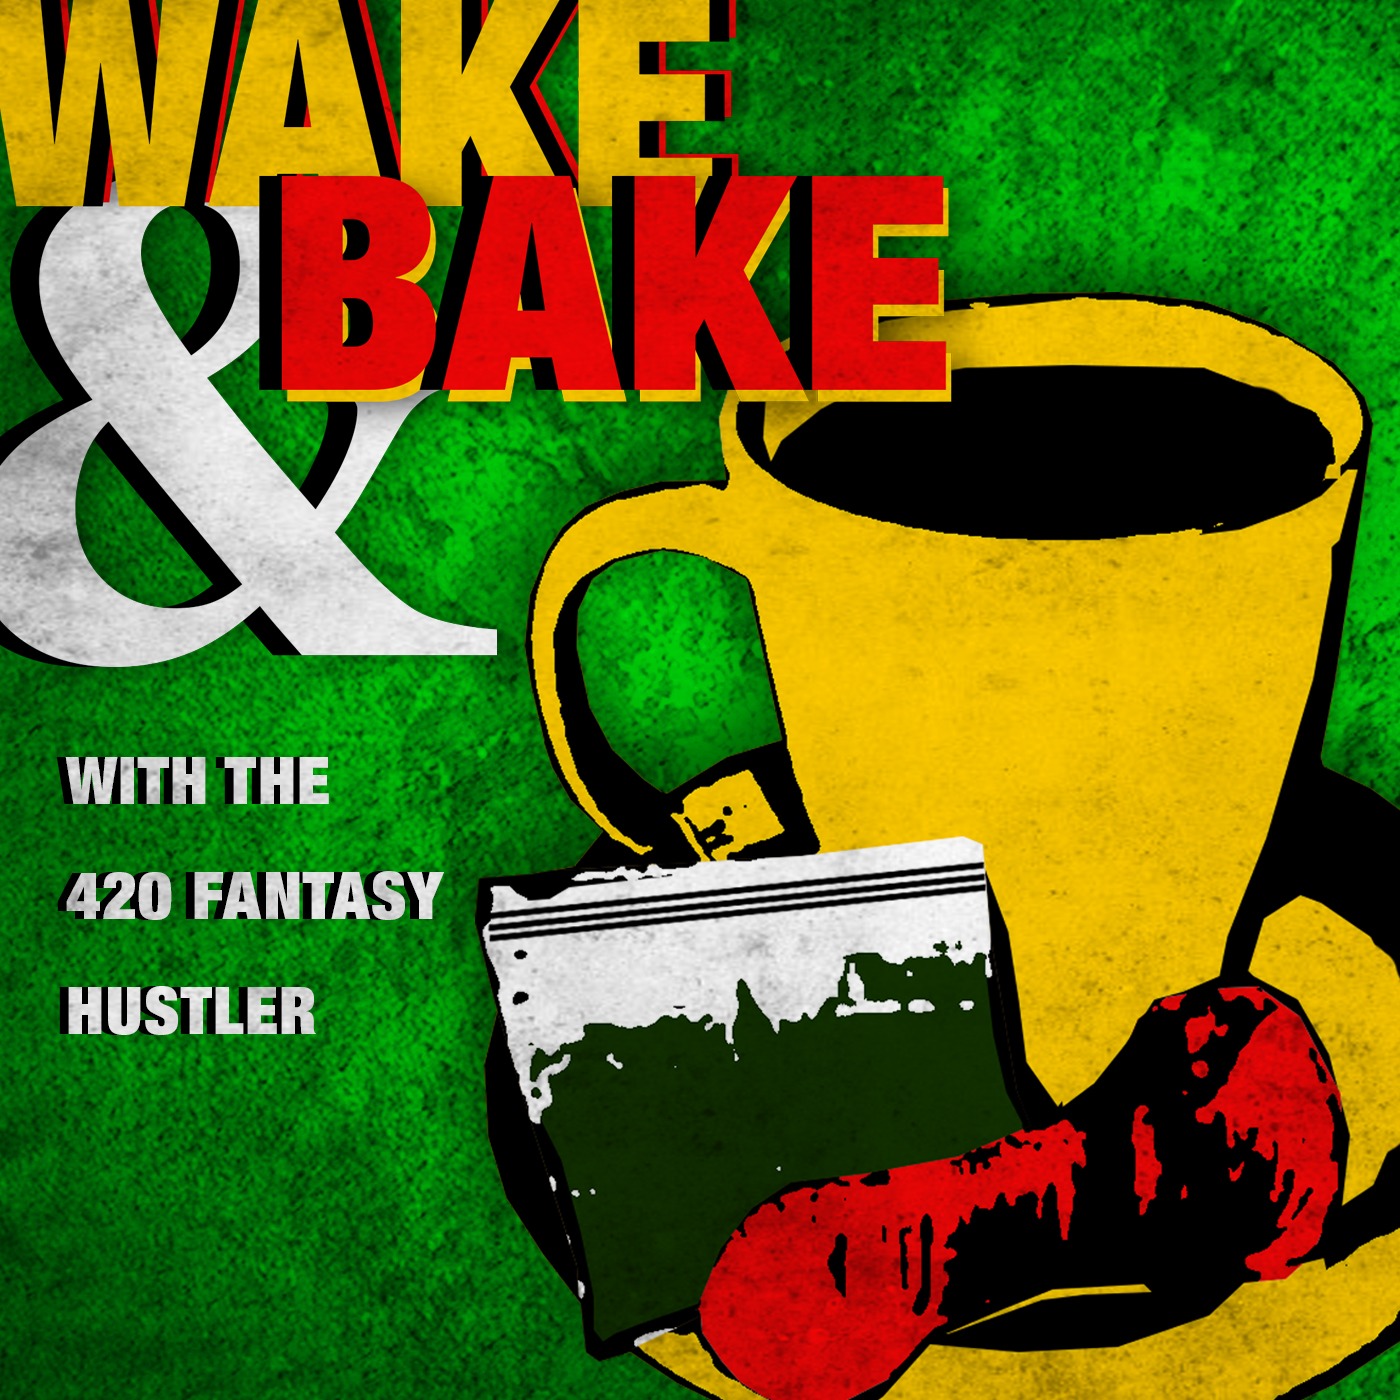 Wake and Bake Q&A Open Forum Image